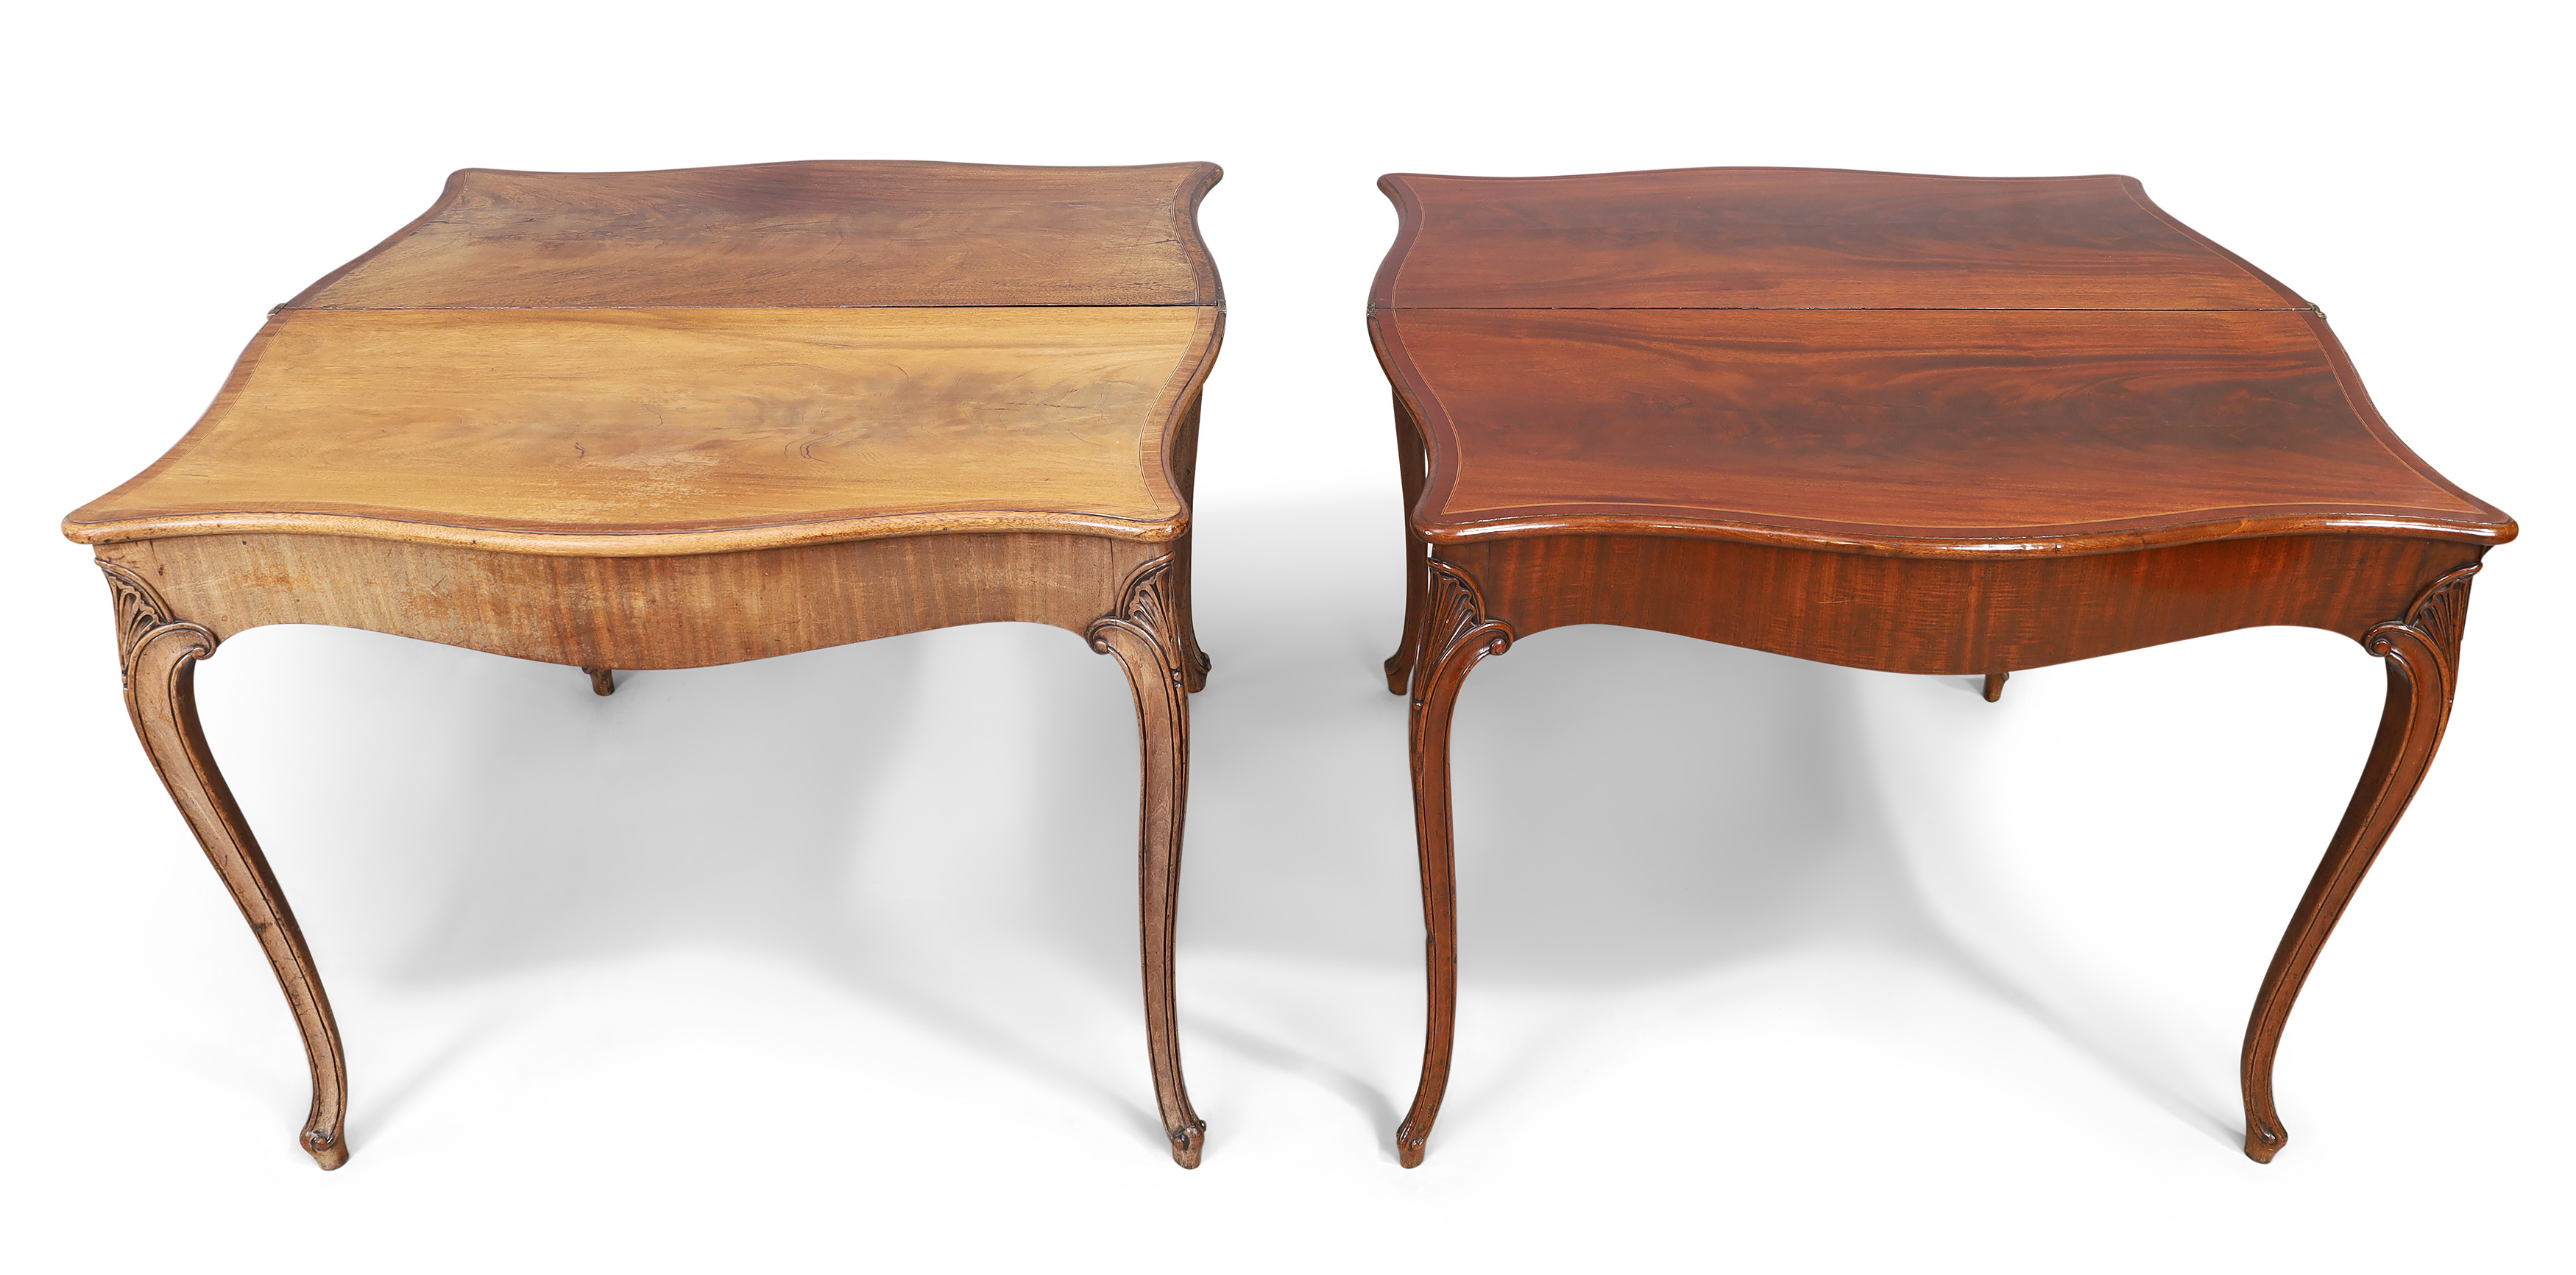 A near pair of George III mahogany serpentine concertina action tea tables, third quarter 18th ce... - Image 4 of 5